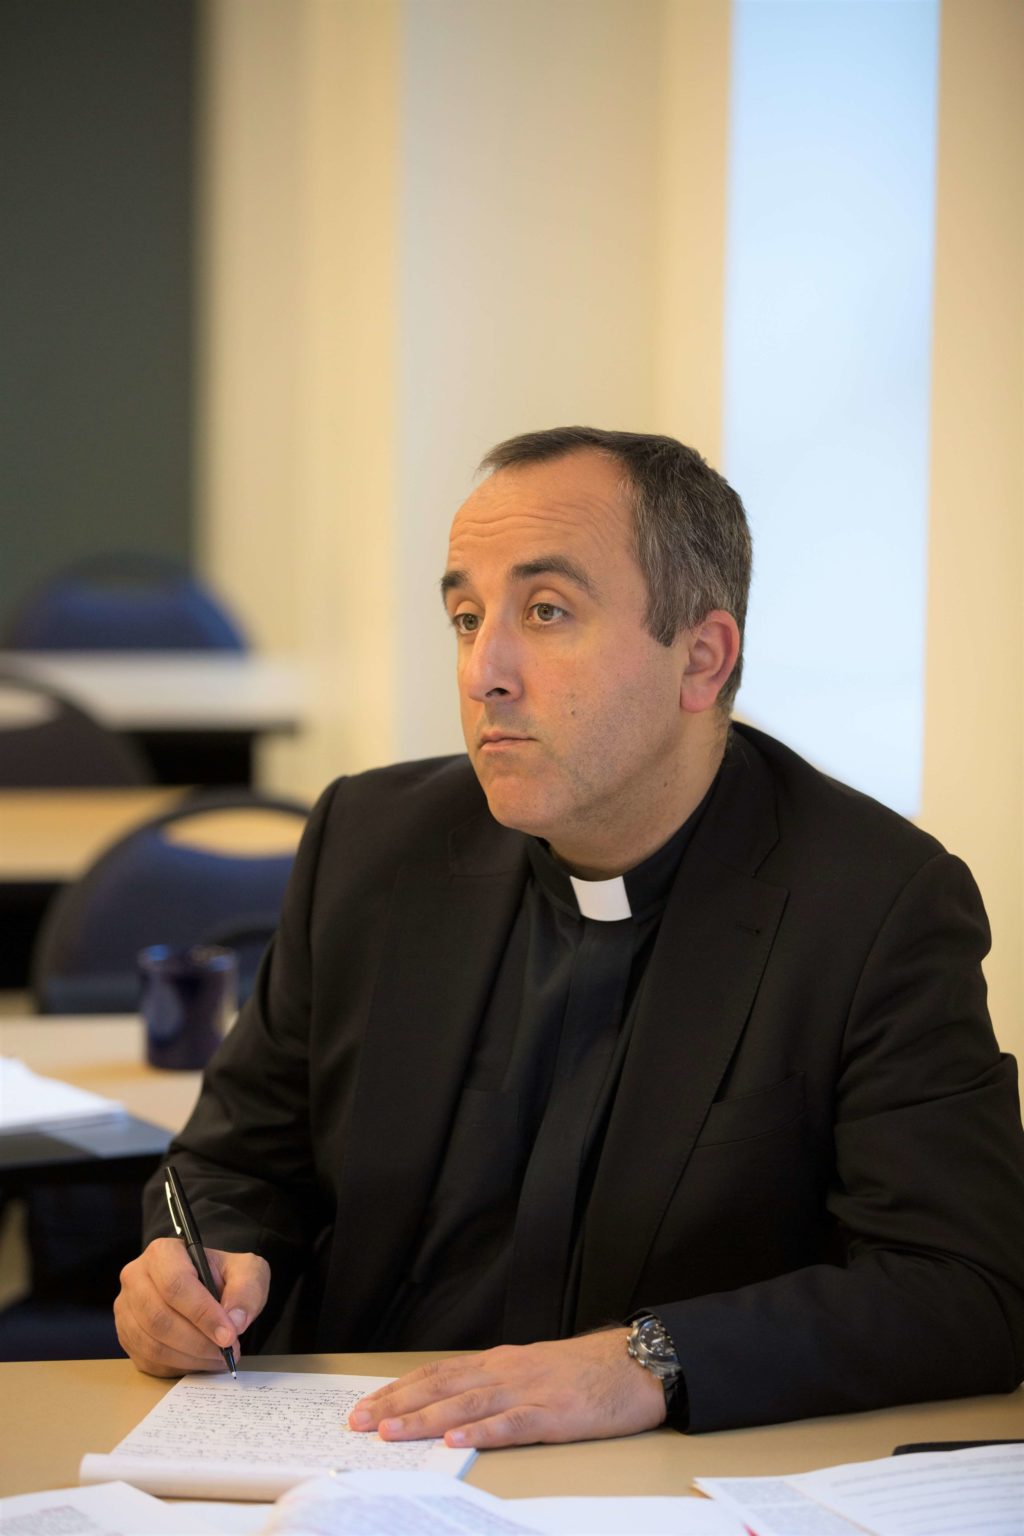 Priest listening during theology lecture in classroom